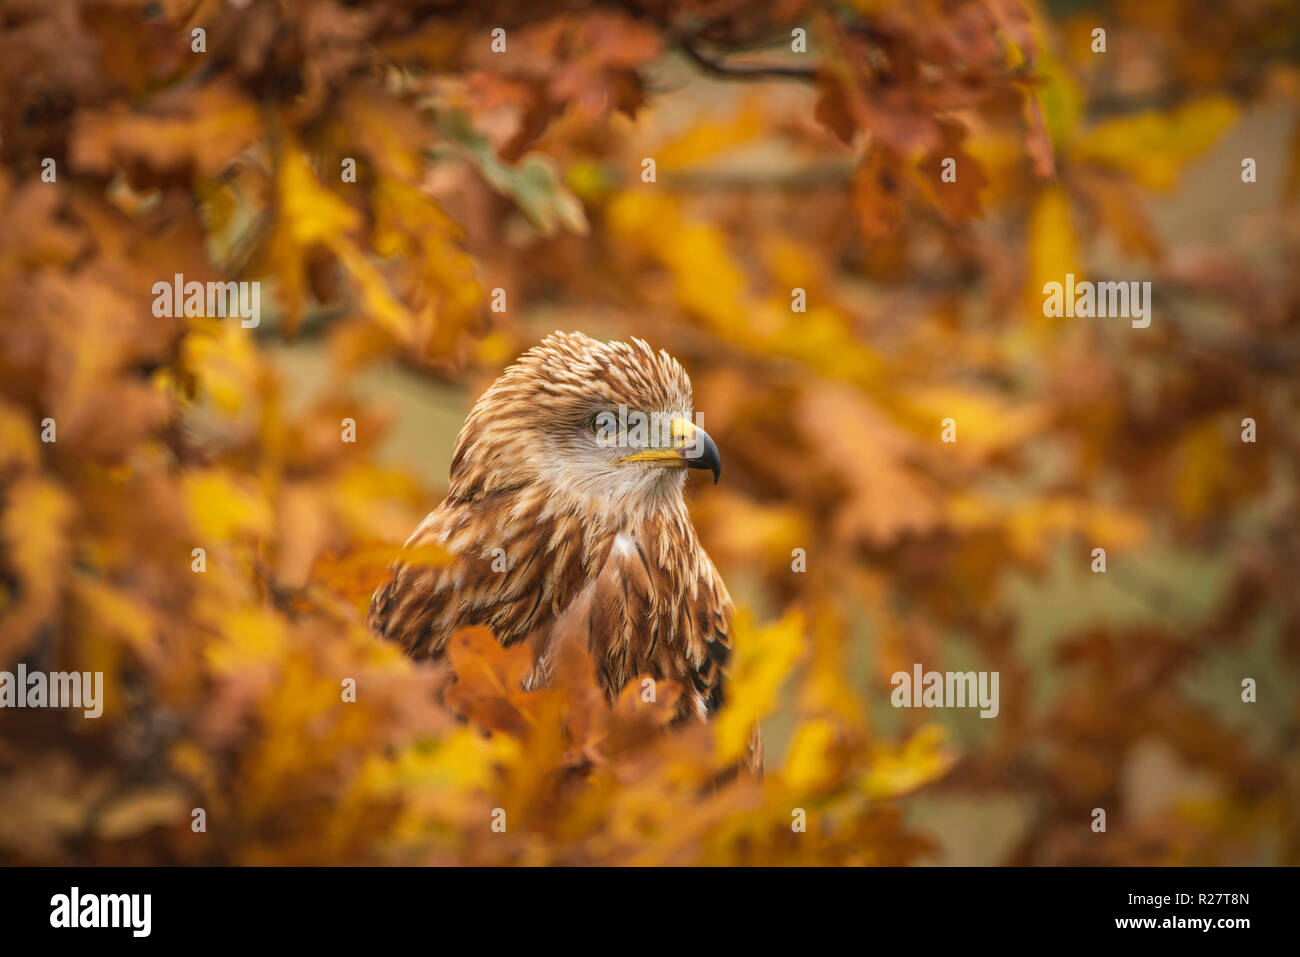 Red kite, Milvus milvus, perched in autumnal oak tree amid yellow and orange colloured leaves Stock Photo